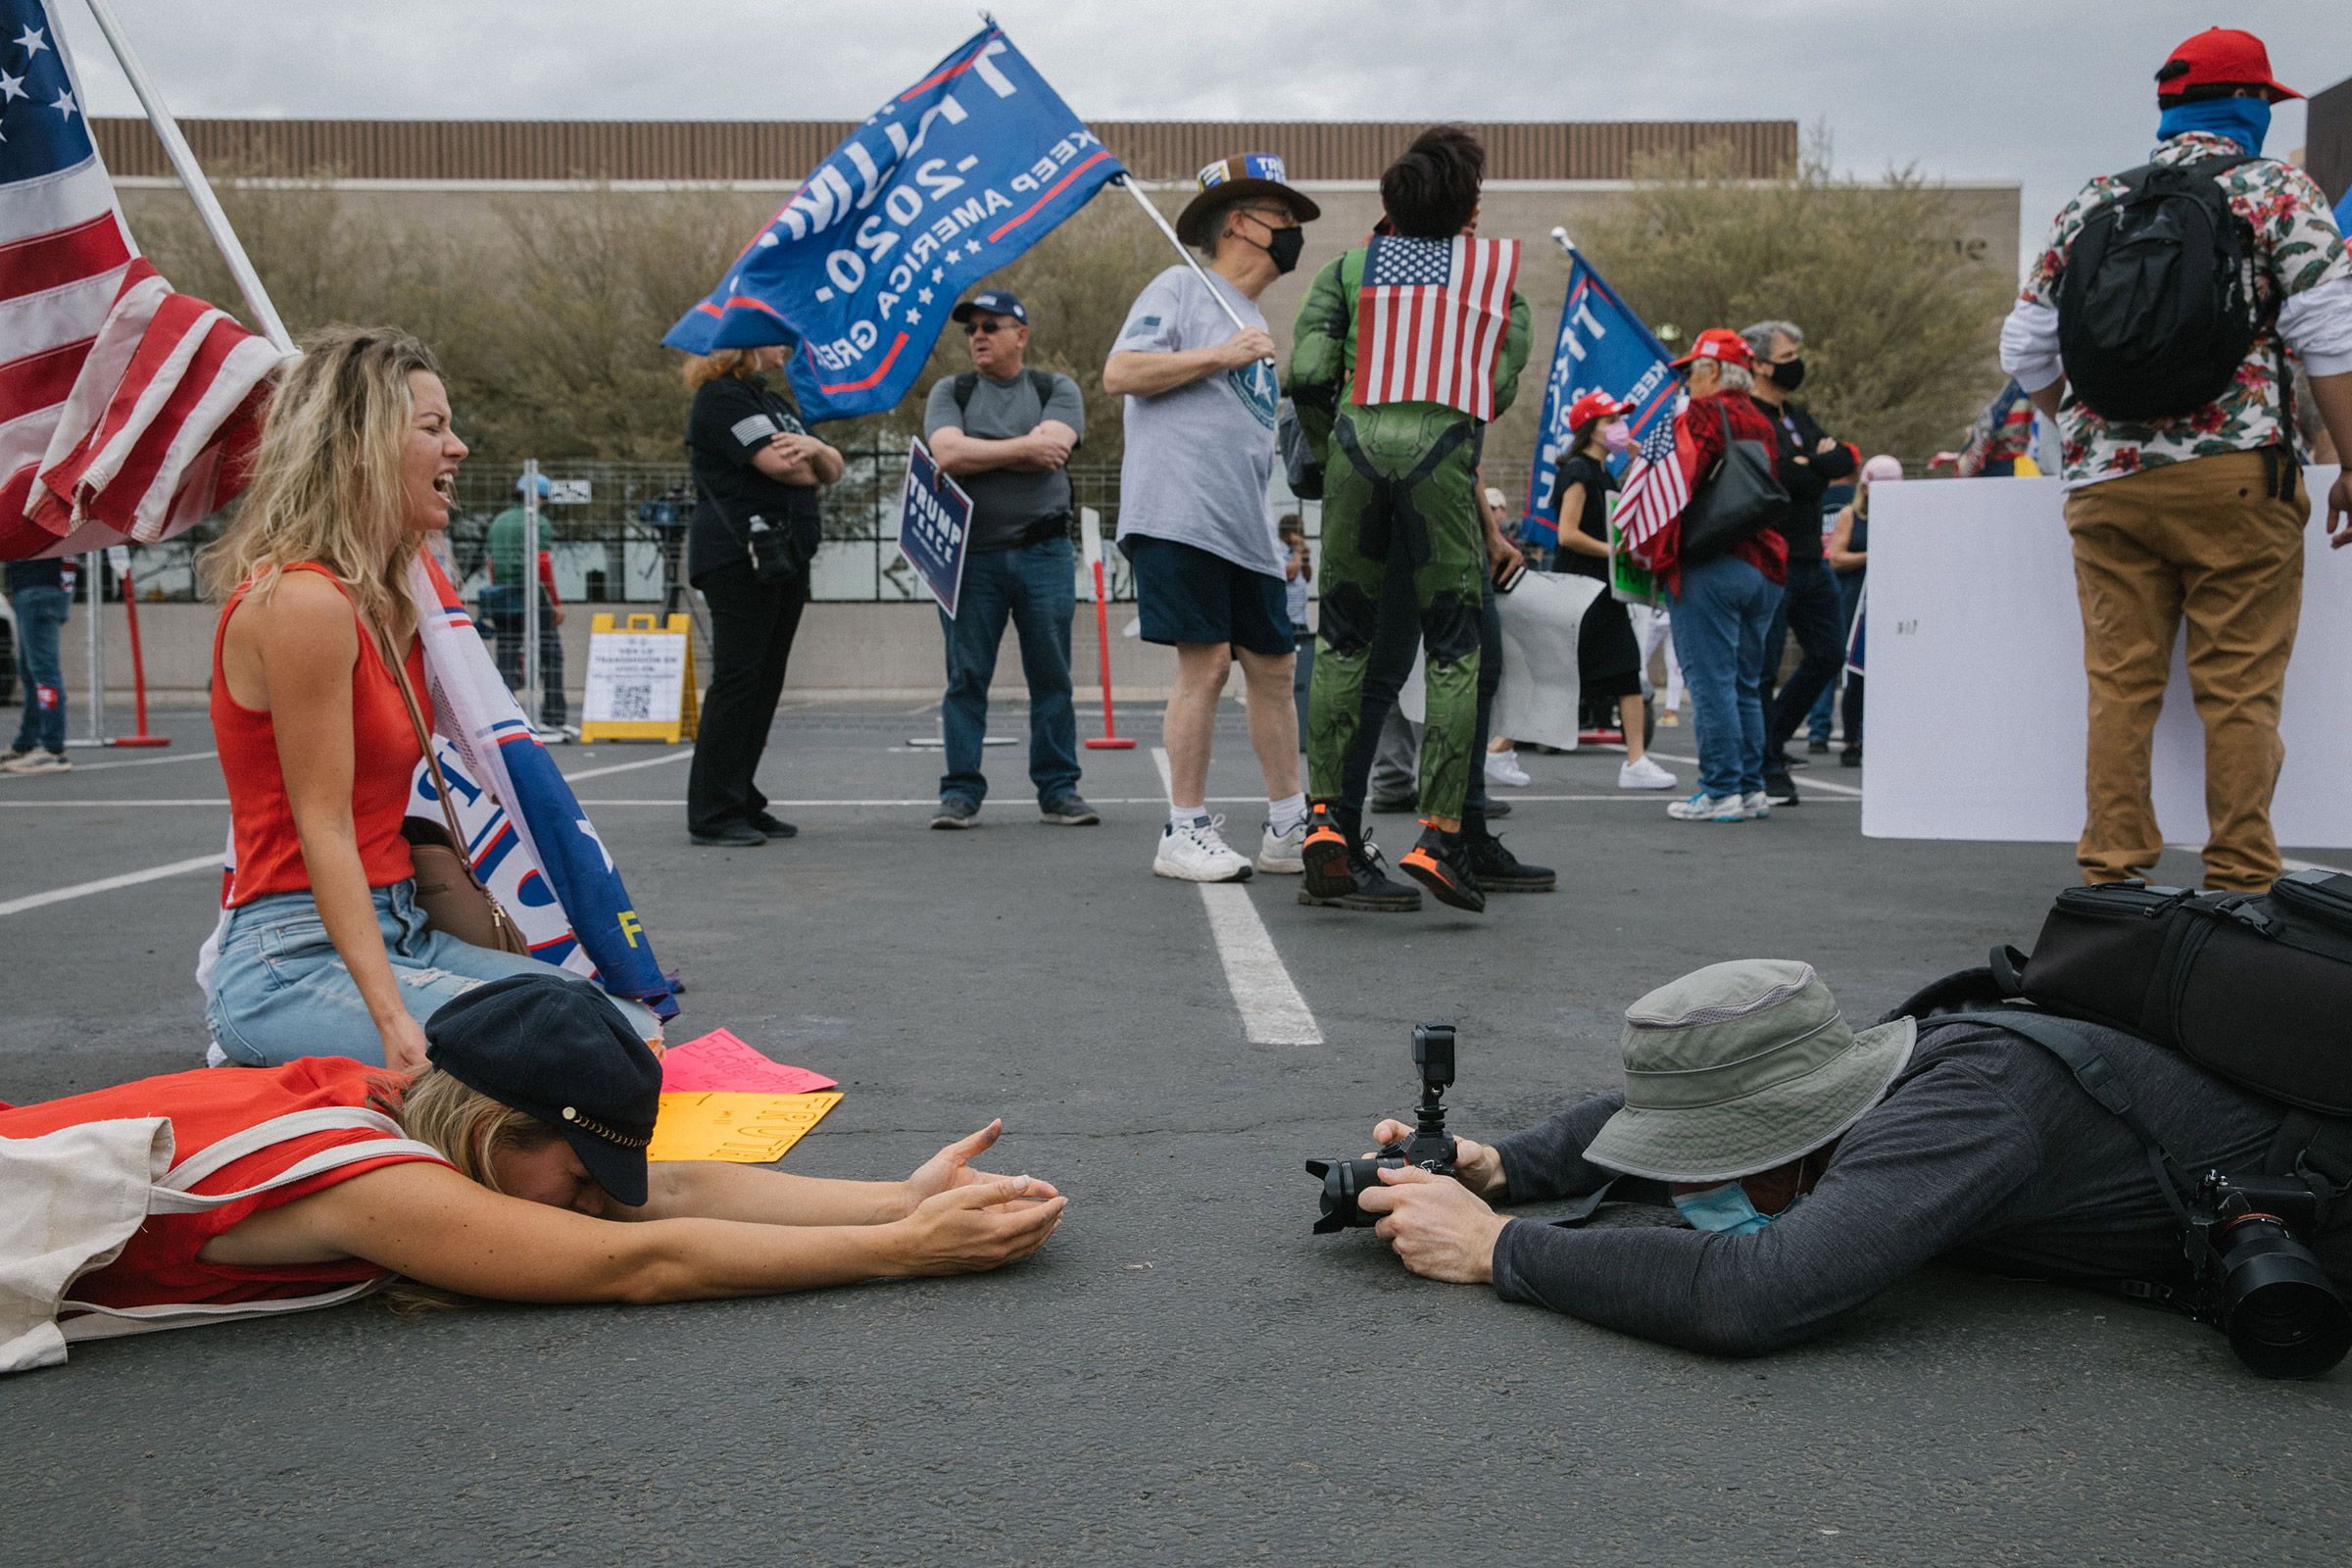 Women pray on the ground at the Maricopa County Elections Department office in Phoenix, AZ on November 6, 2020